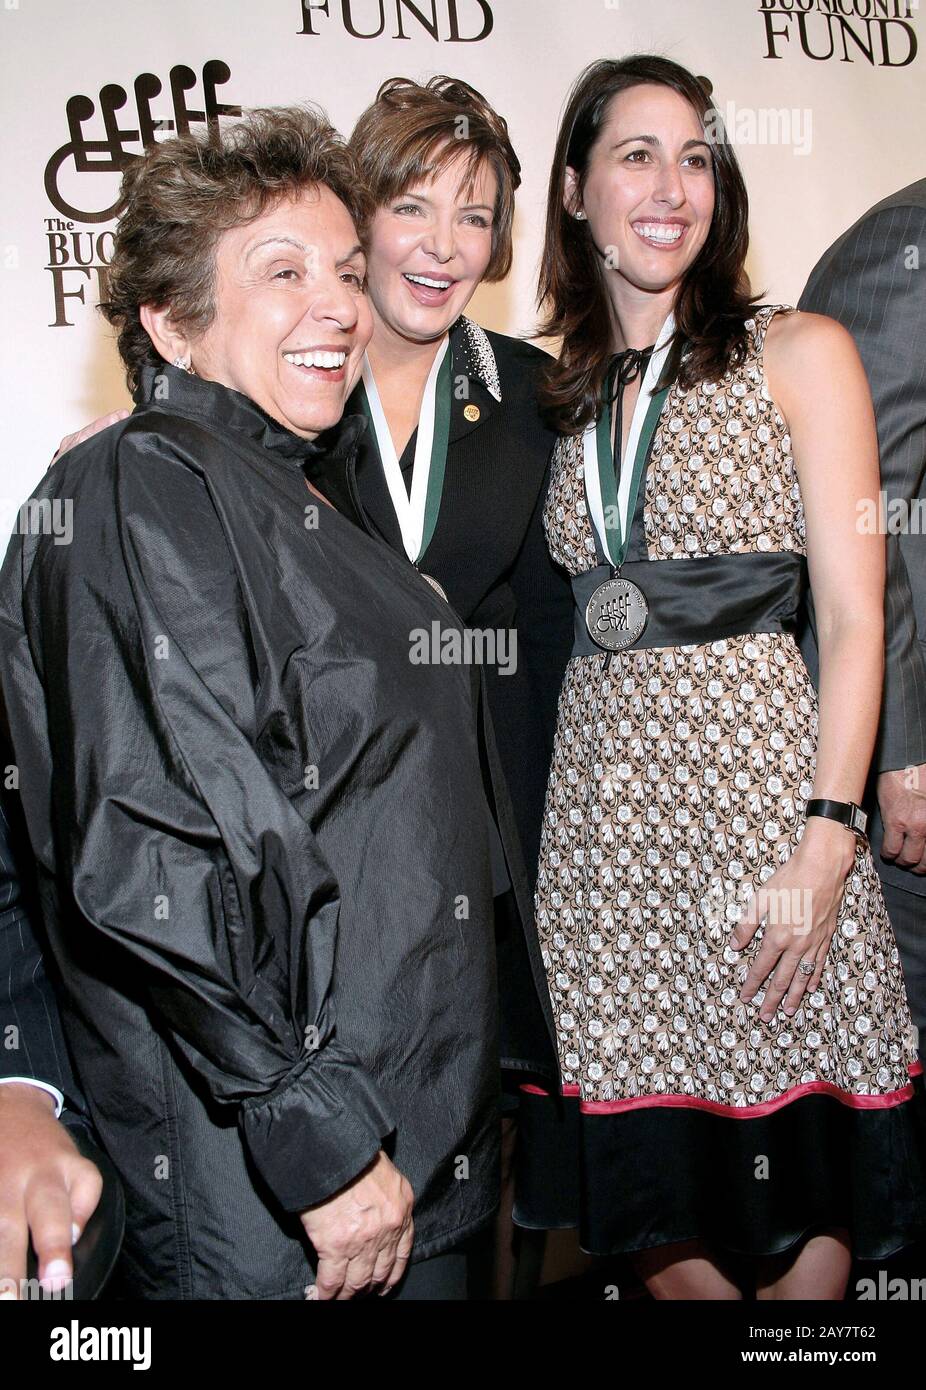 New York, NY, USA. 17 September, 2007. Miami University President, Donna Shalala, Sportscaster, Lesley Visser, record breaking competitive swimmer, Janet Evans at the 22nd Annual Sports Legends Dinner to benefit The Buoniconti Fund to Cure Paralysis at Waldorf=Astoria. Credit: Steve Mack/Alamy Stock Photo